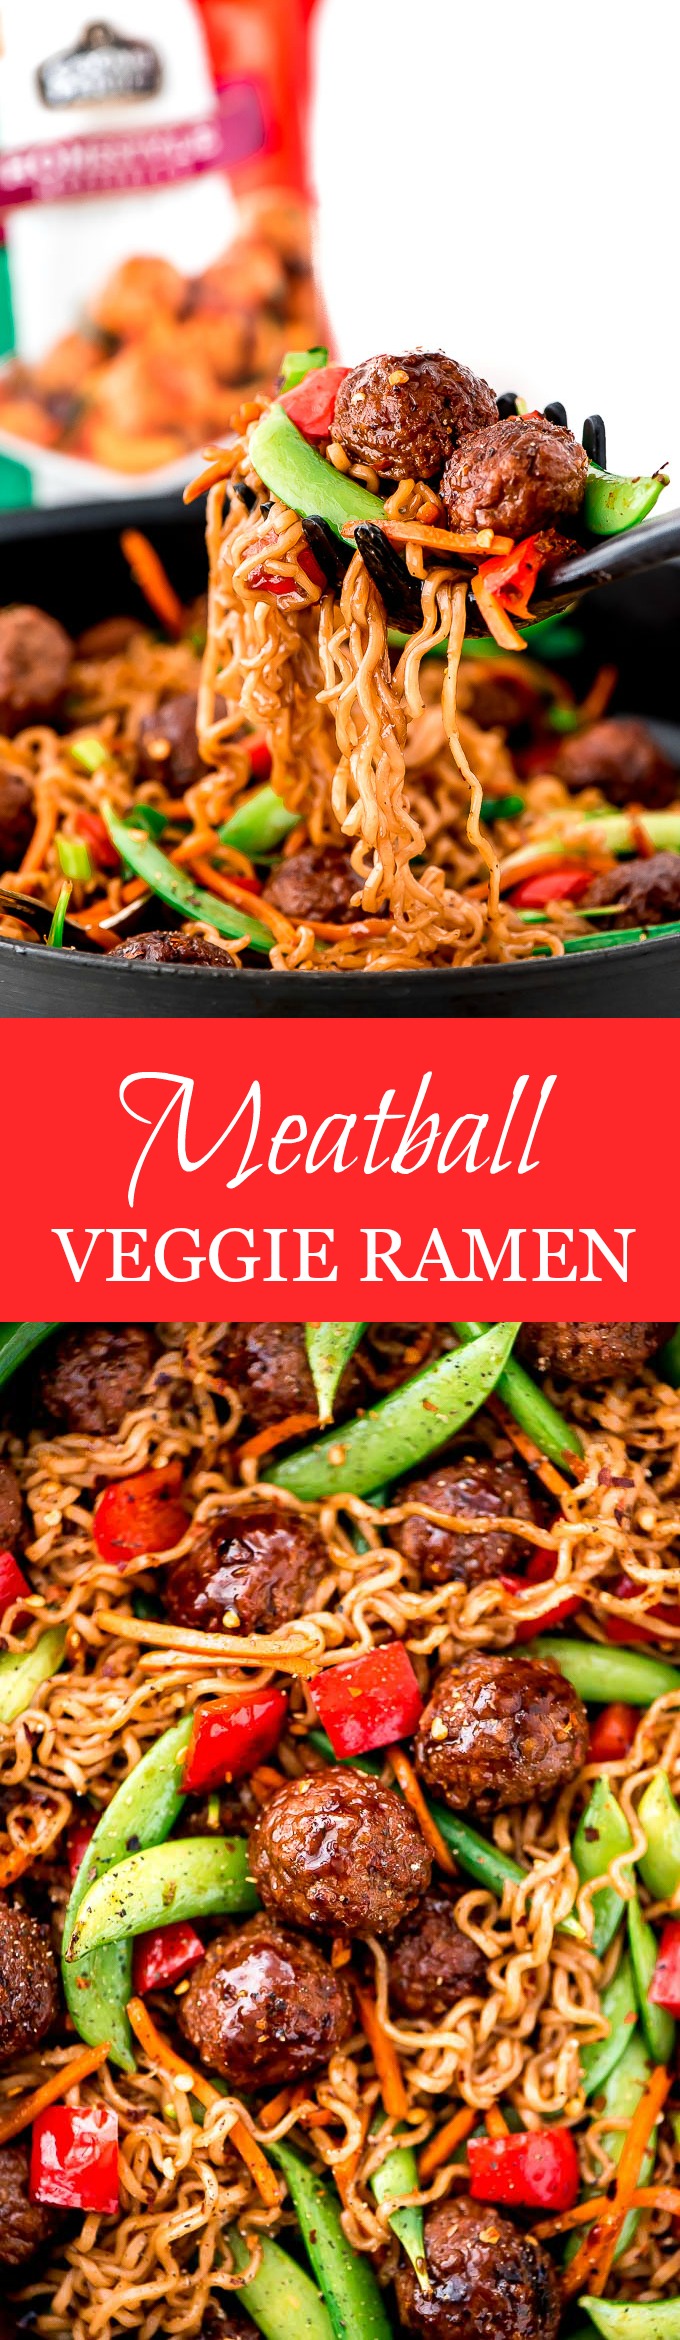 Get dinner on the table for a meal with your family in less than 30 minutes with this flavorful and nutritious Meatball Veggie Ramen.